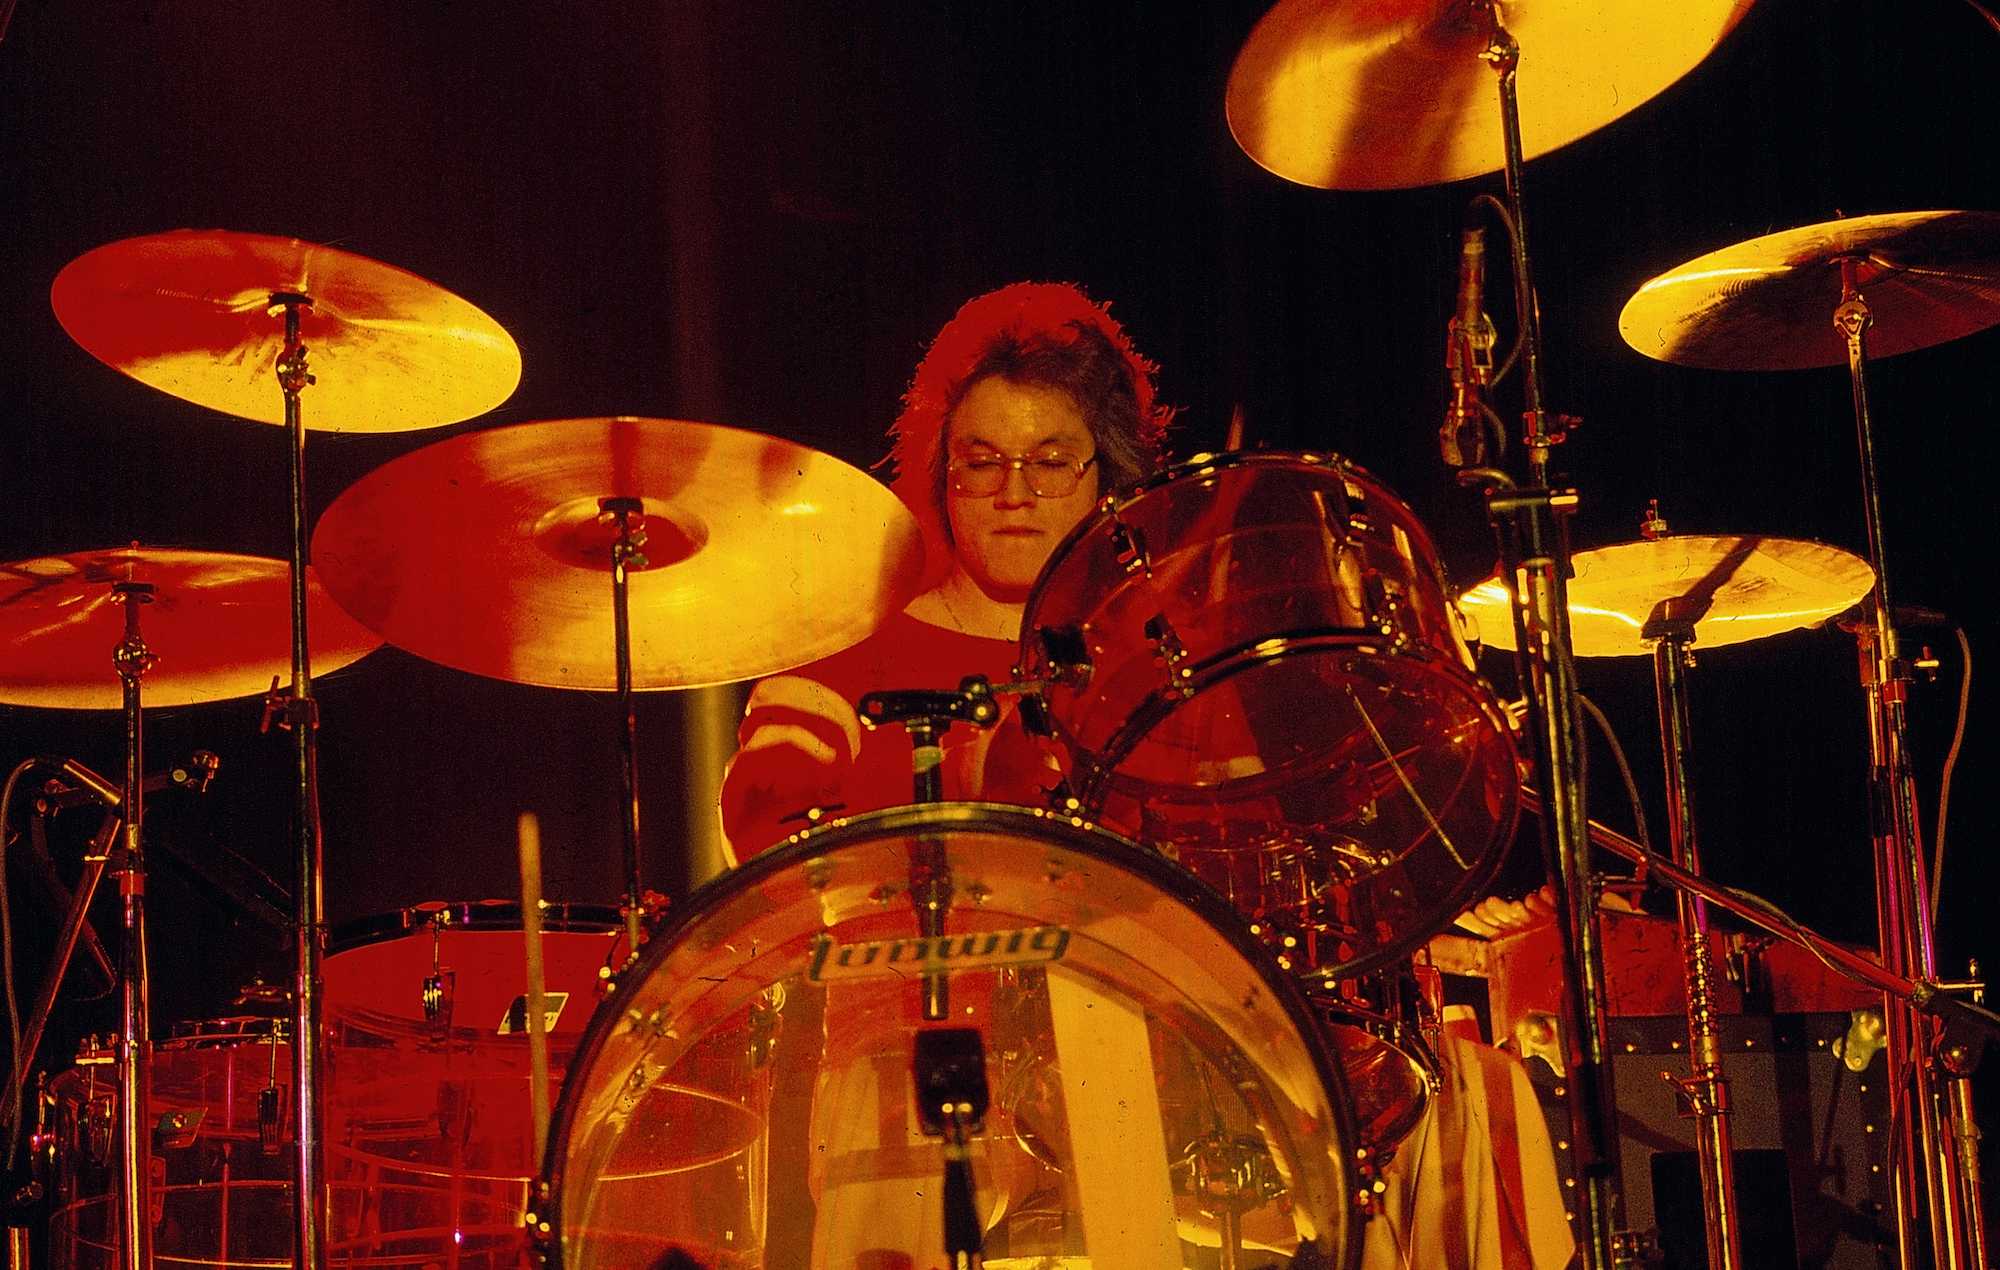 Bachman-Turner Overdrive "BTO" Drummer Robbie Bachman, Dead at 69